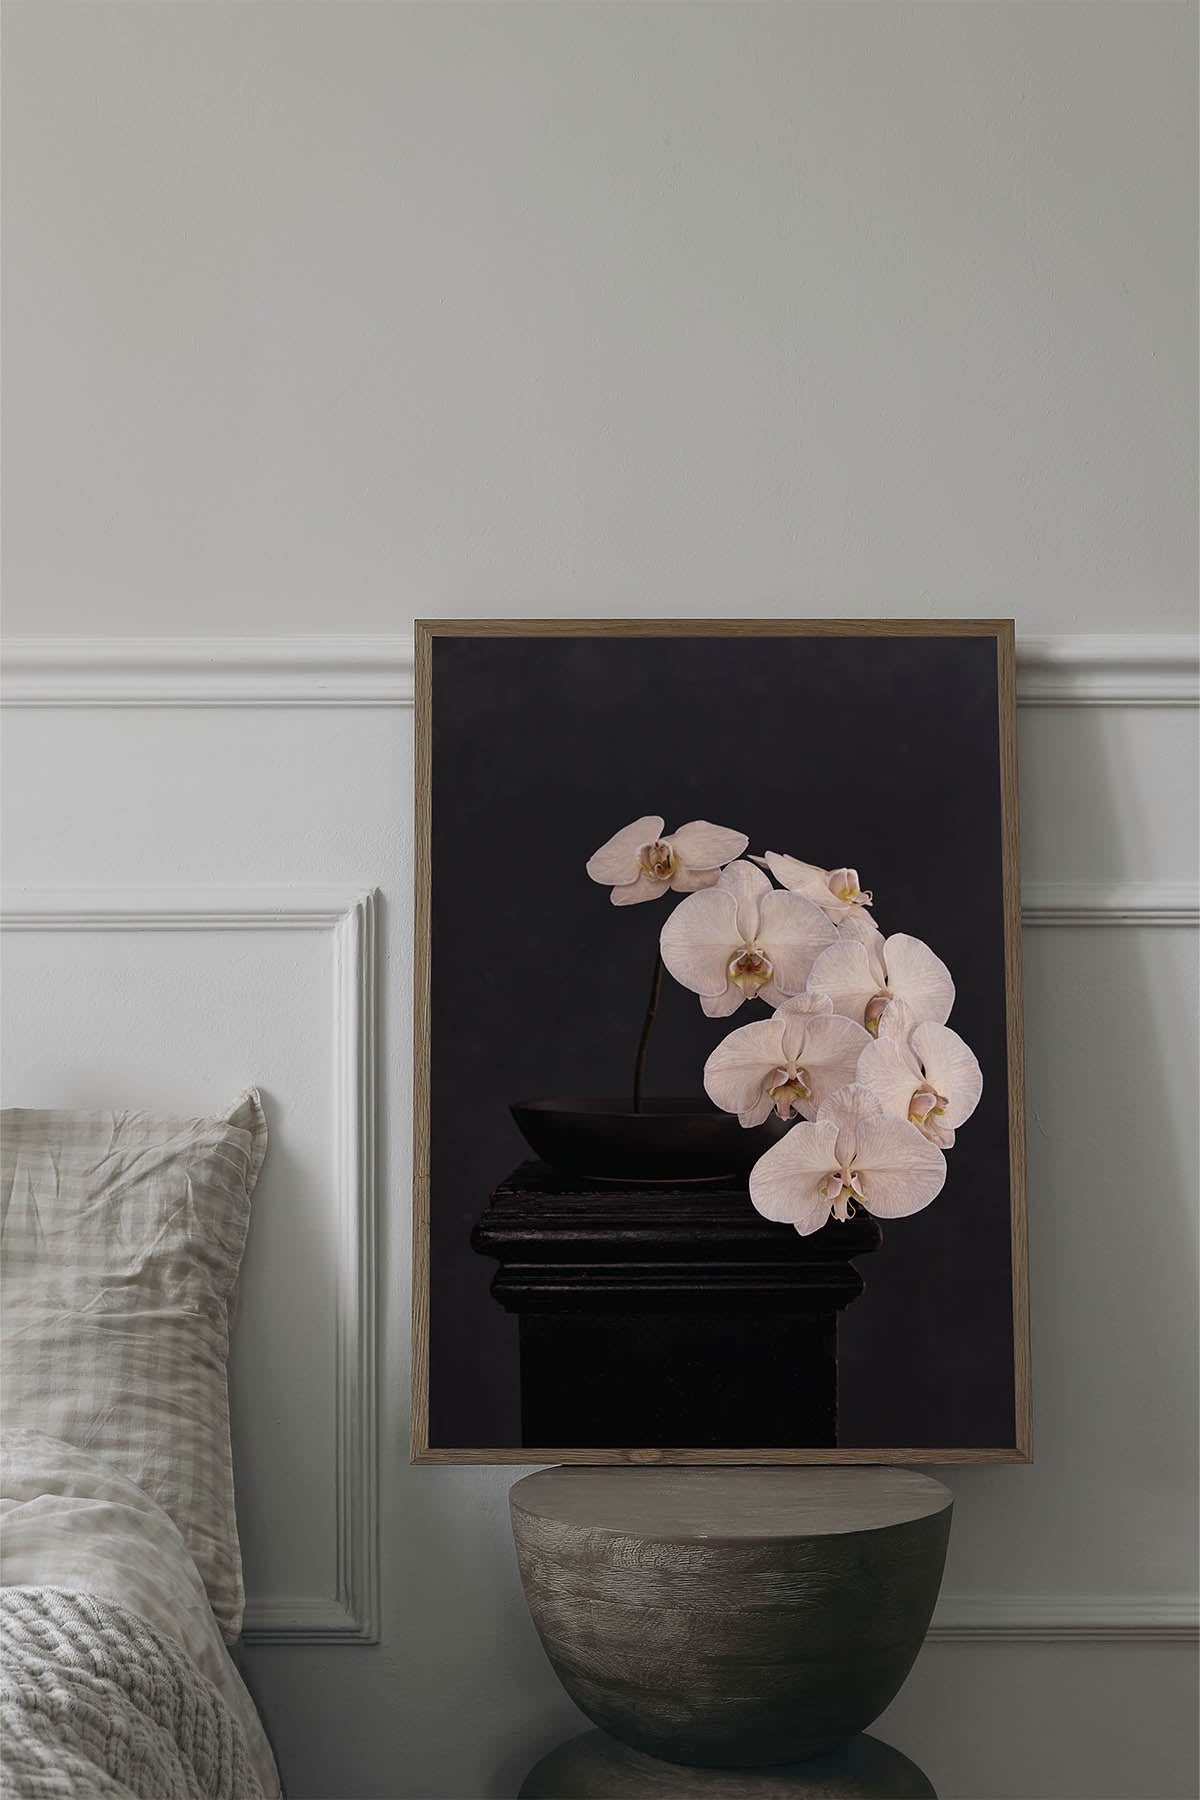 Fine Art Print Of A White Phaleanopsis Stem In A Black Bowl On A Black Mantle With A Black Rustic Background In A Bedroom Leaning Against A Wall With Details.